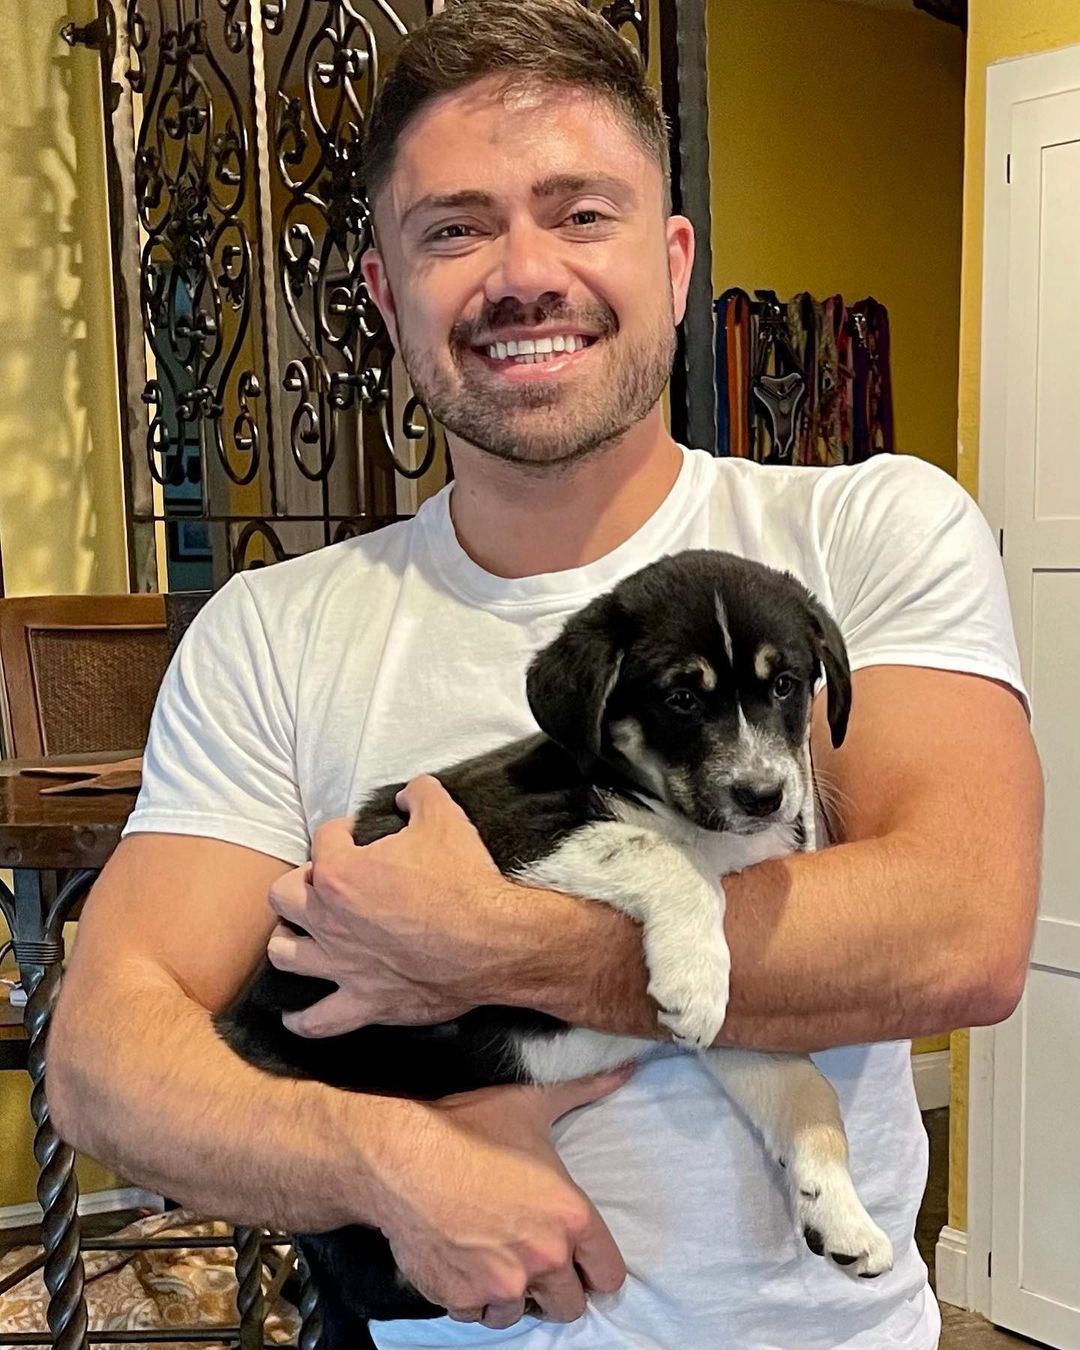 Penny, the first of the “P” litter of puppies to get adopted. It was all smiles for this adopter as he cradles his new baby girl. 

Many others hope to be in their Furever family so please consider adopting a Rescue 🐾

www.FurryFriendzy.org
<a target='_blank' href='https://www.instagram.com/explore/tags/FurryFriendzy/'>#FurryFriendzy</a> 
<a target='_blank' href='https://www.instagram.com/explore/tags/adoptdontshop/'>#adoptdontshop</a> 
<a target='_blank' href='https://www.instagram.com/explore/tags/rescuedogsofinstagram/'>#rescuedogsofinstagram</a> 
<a target='_blank' href='https://www.instagram.com/explore/tags/volunteer/'>#volunteer</a> 
<a target='_blank' href='https://www.instagram.com/explore/tags/rescuedog/'>#rescuedog</a> 

🐶💜🐶
🐾VOLUNTEER🐾
🐾FOSTER🐾
🐾ADOPT🐾